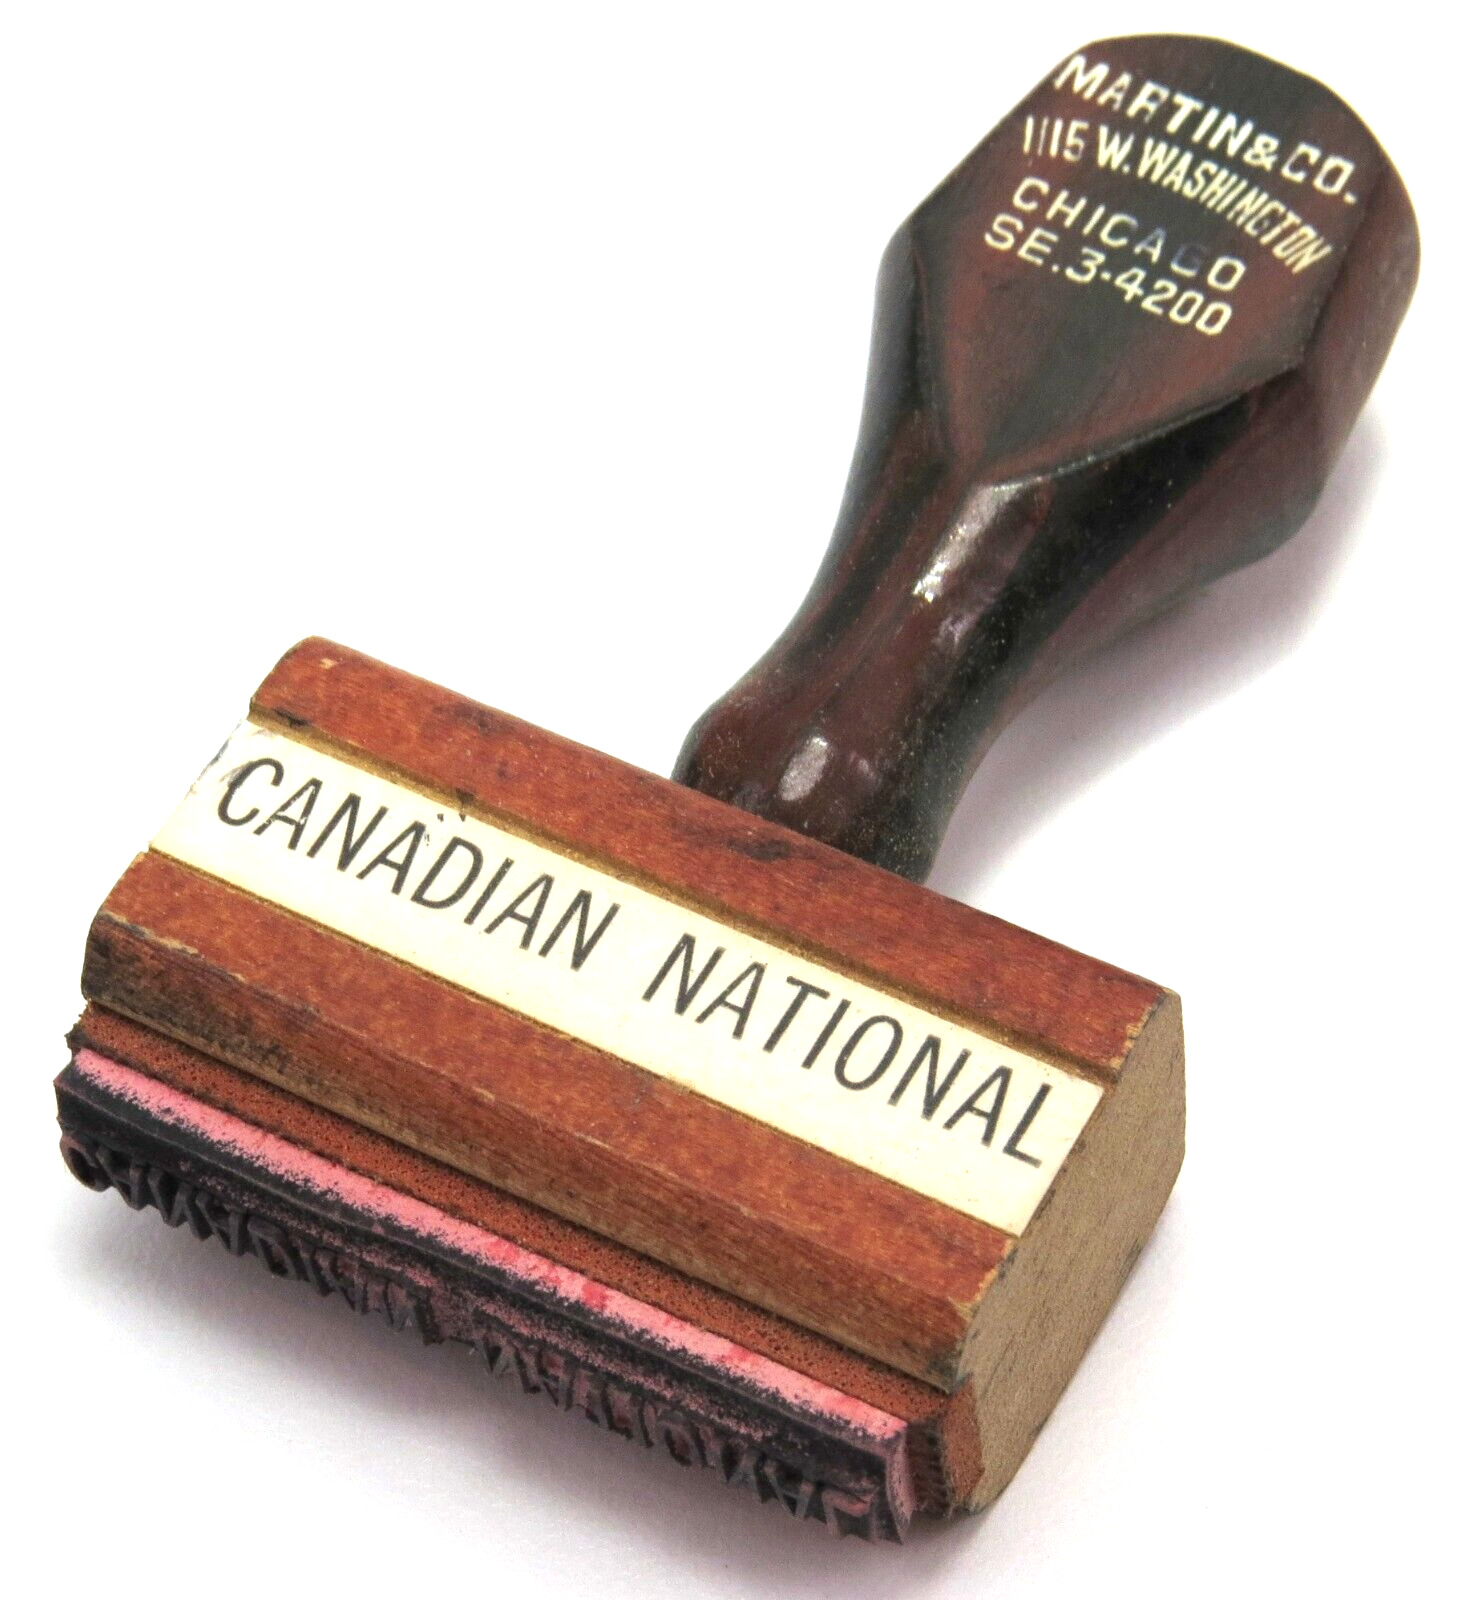 Canadian National Railroad Vintage Rubber Stamp Railroadiana, Martin & Co.